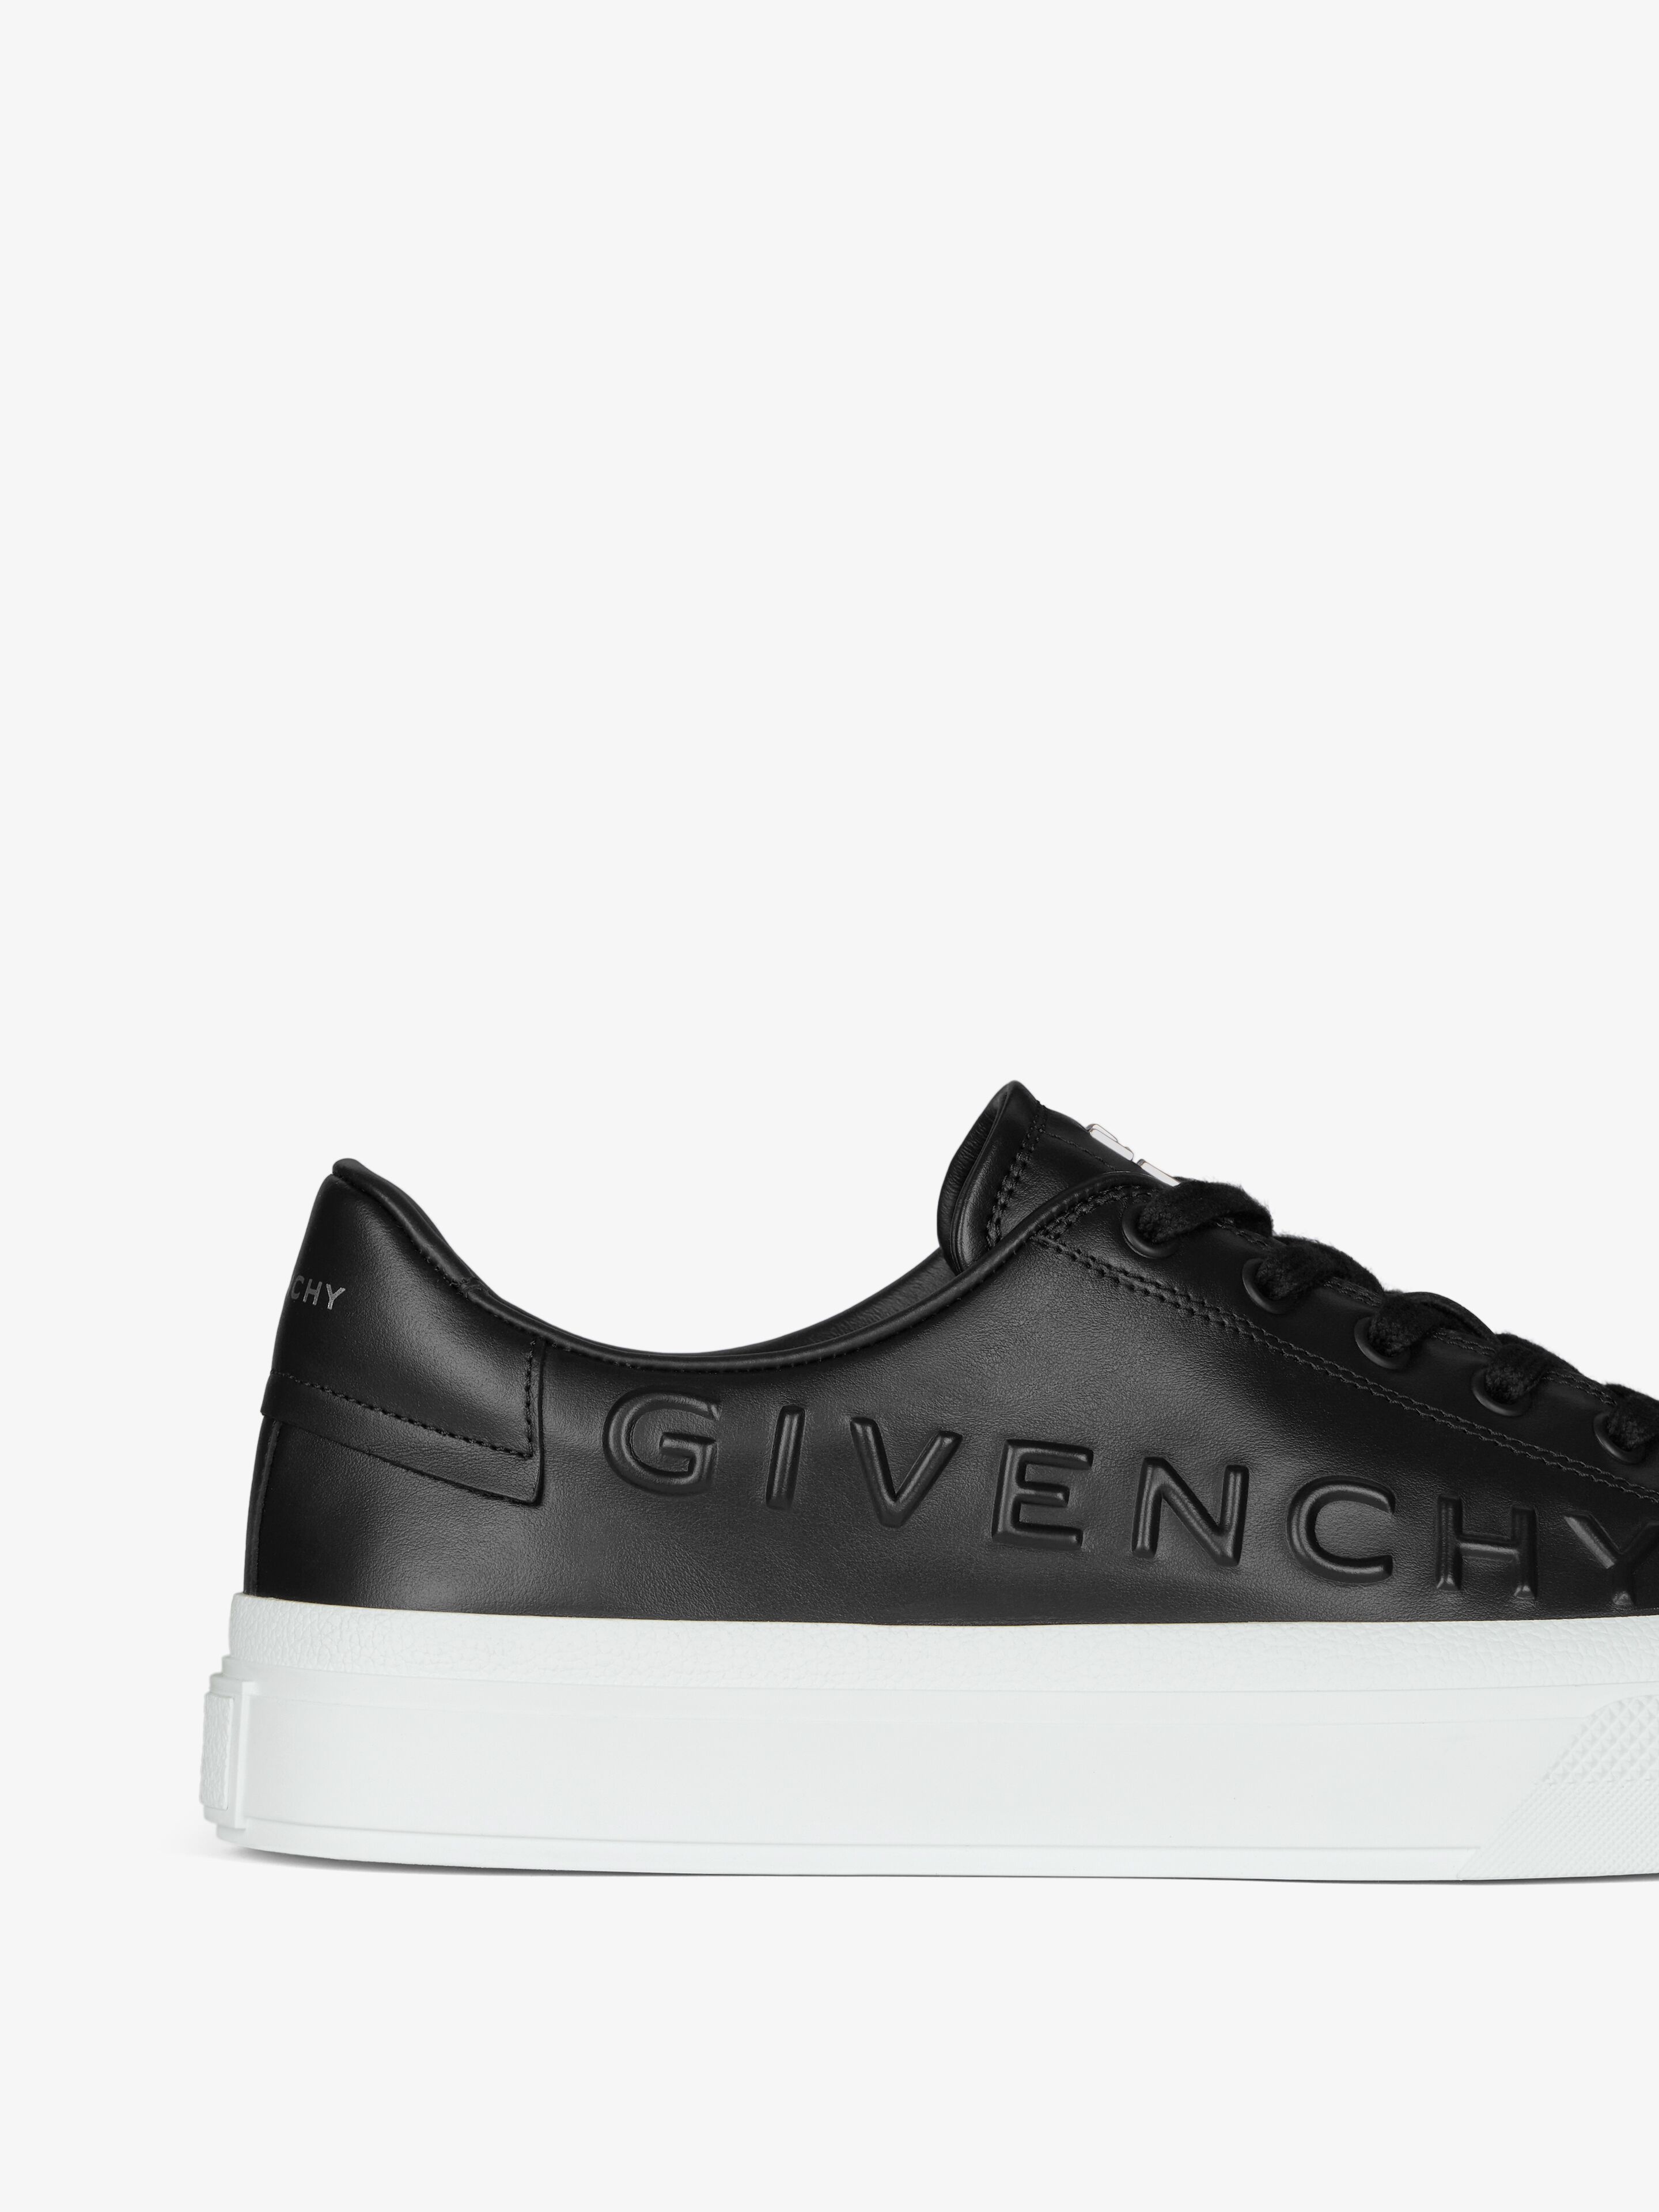 CITY SPORT SNEAKERS IN GIVENCHY LEATHER - 6